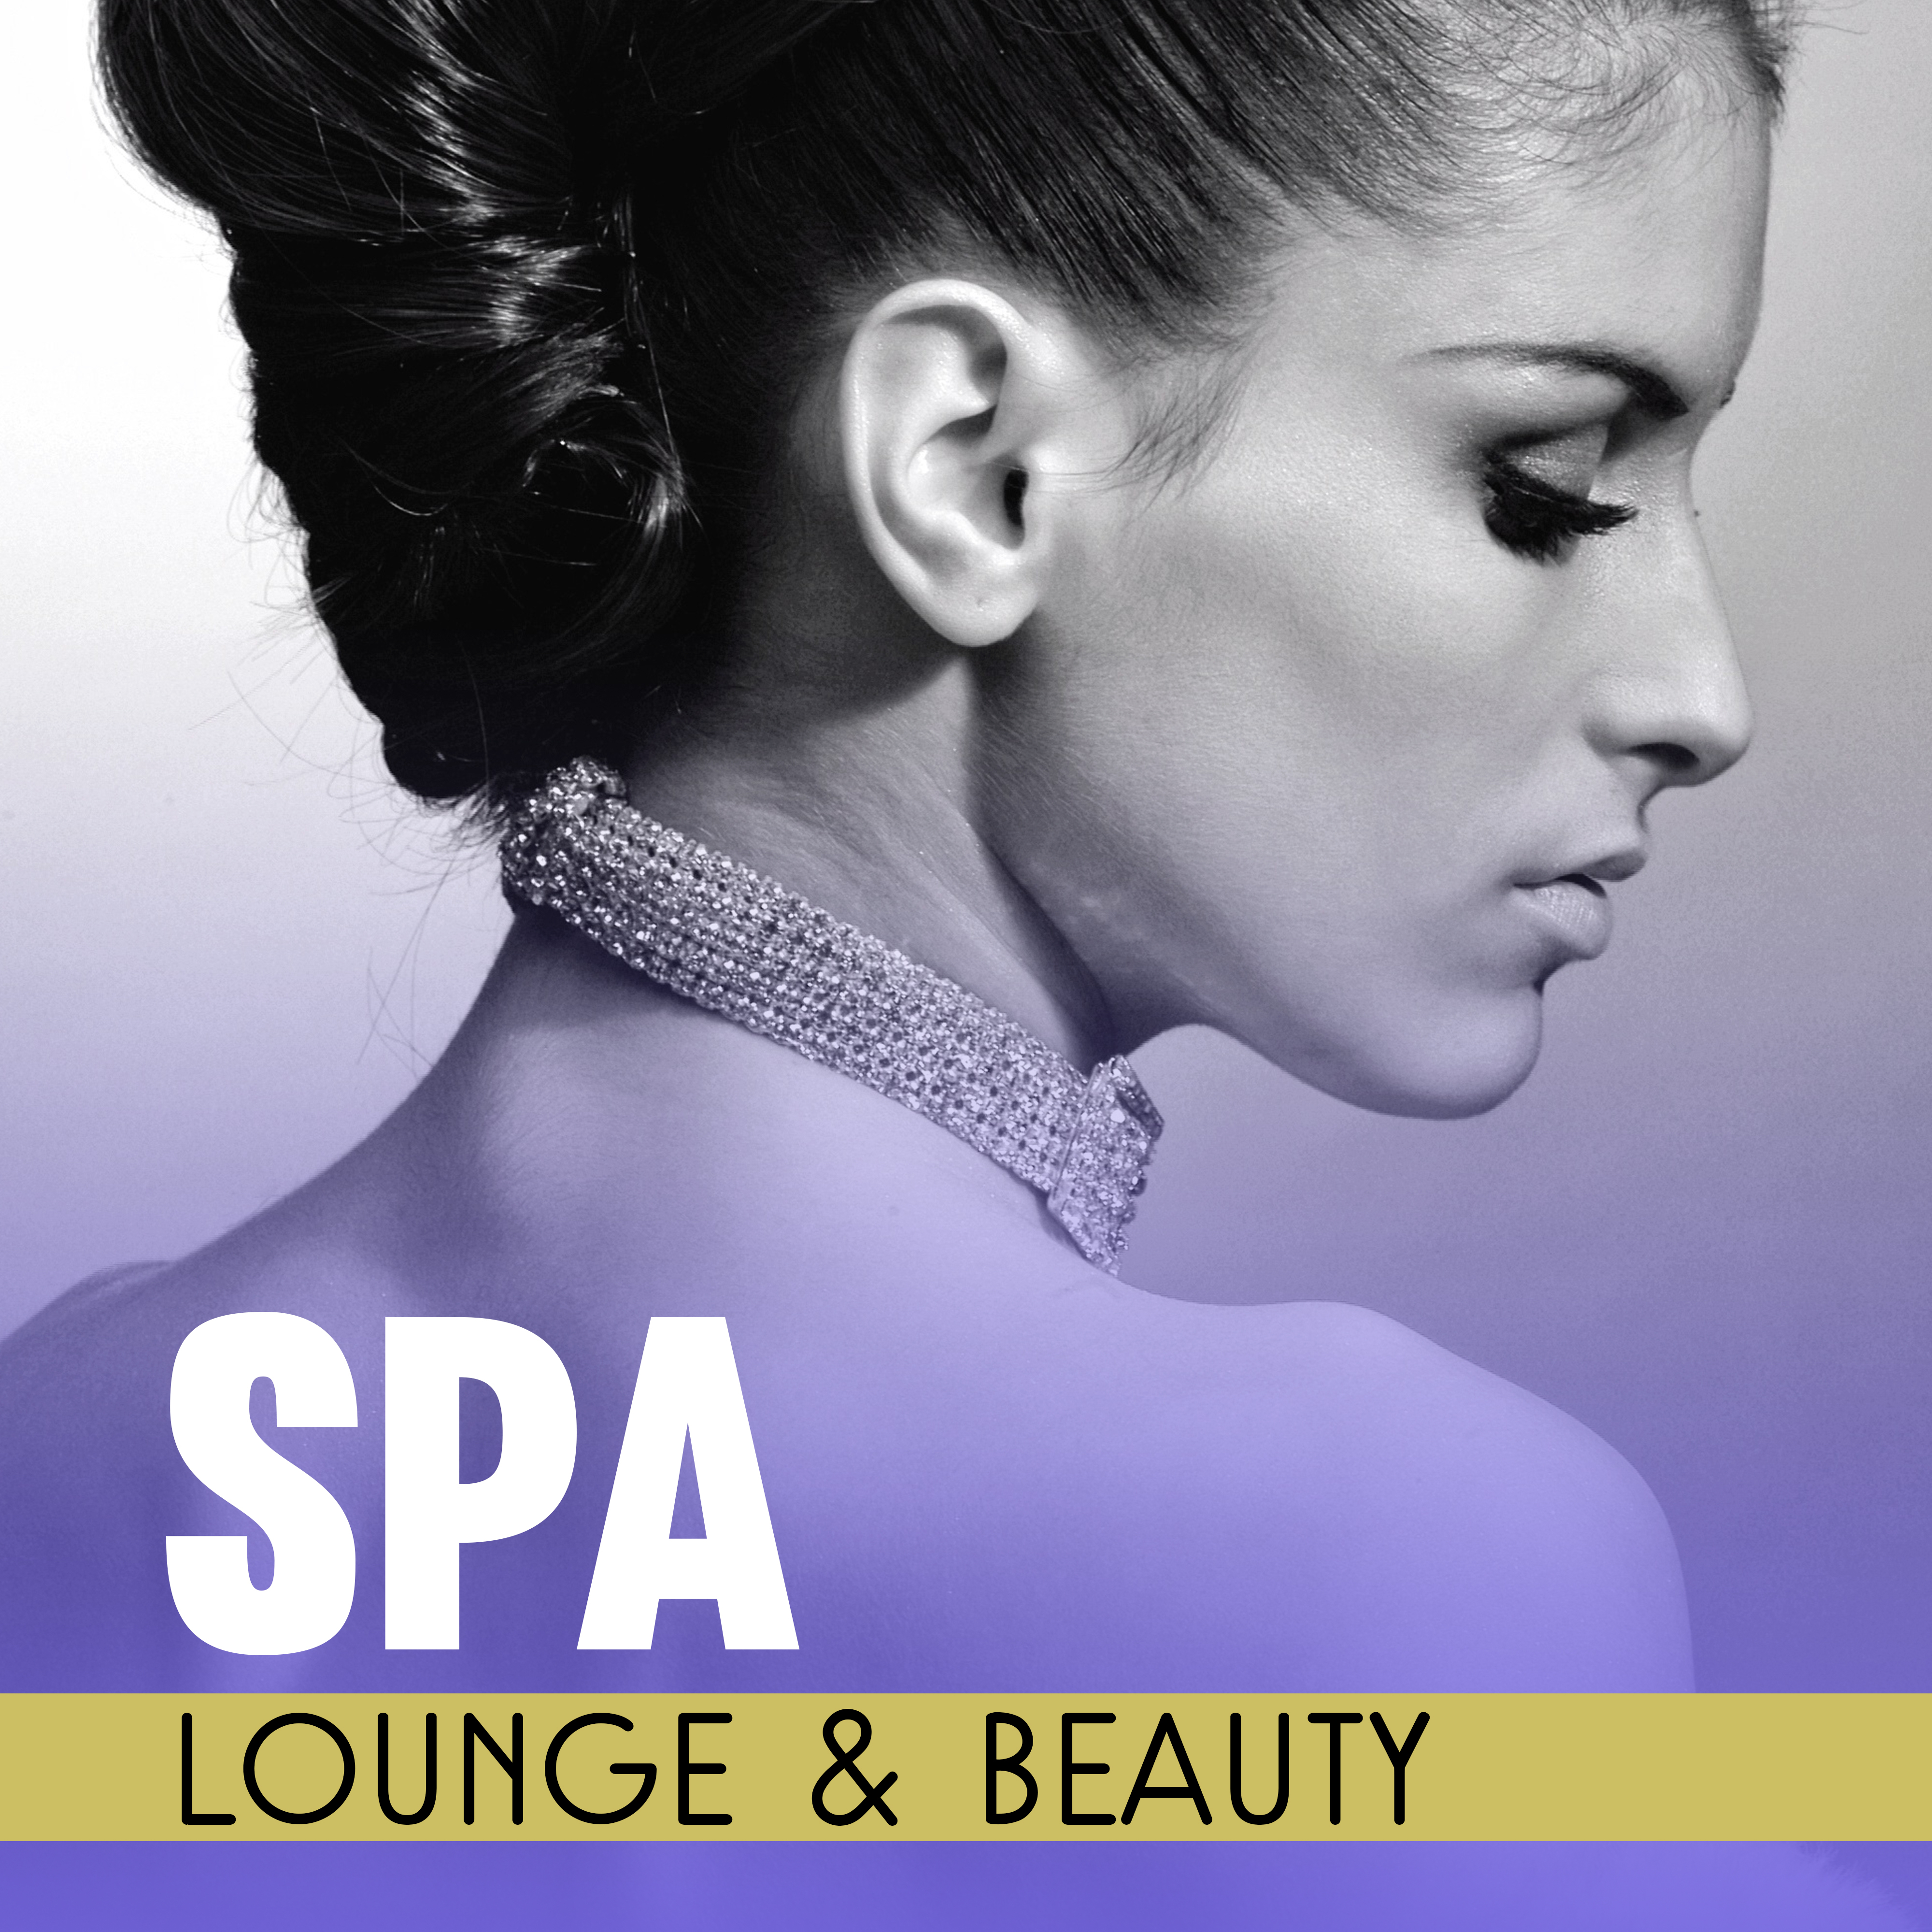 Spa Lounge  Beauty  Peaceful Sounds of Nature, Relaxation Spa, Wellness Treatments, Hotel Music